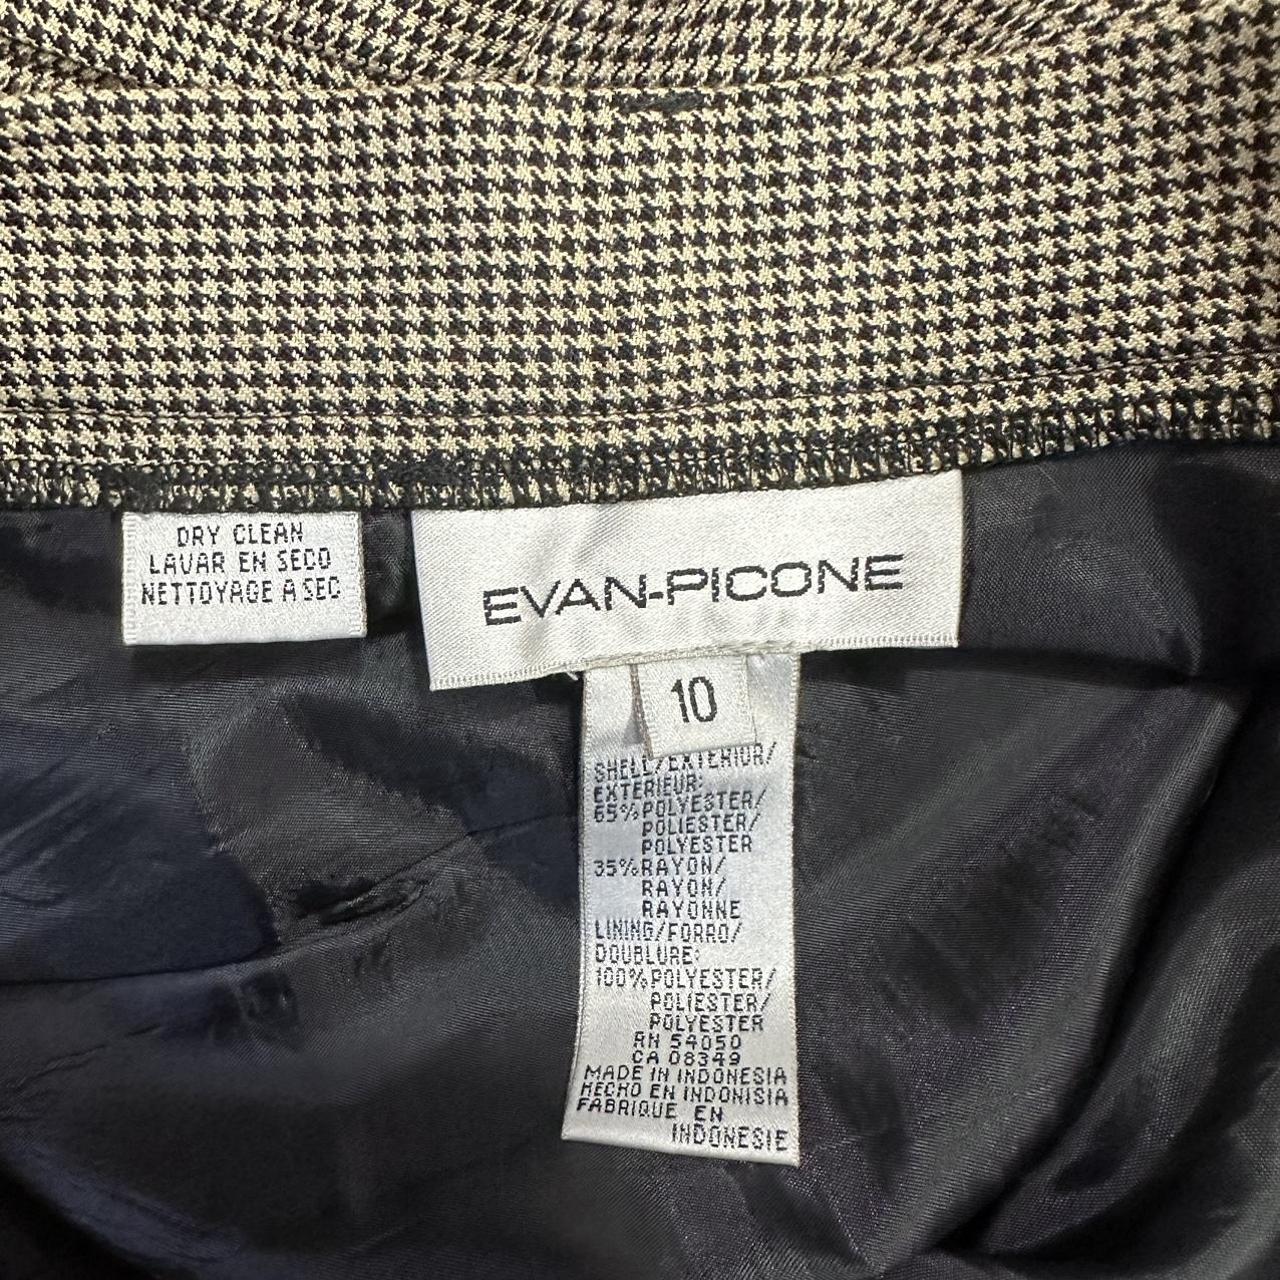 Evan Picone Women's Tan and Black Trousers (4)